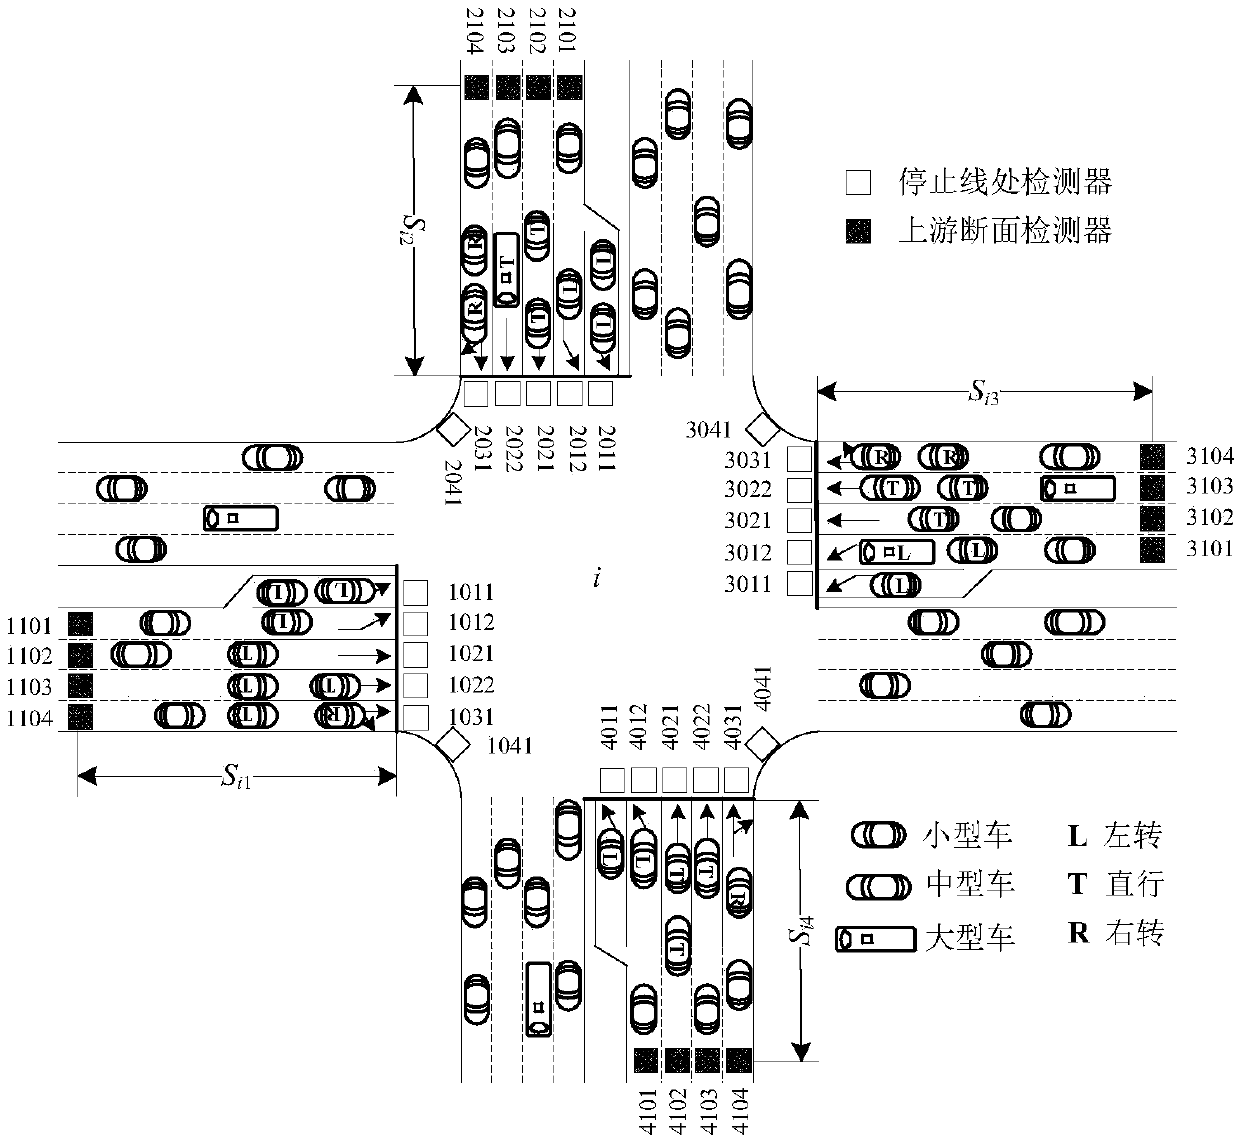 Signalized intersection traffic demand estimation method affected by traffic stream